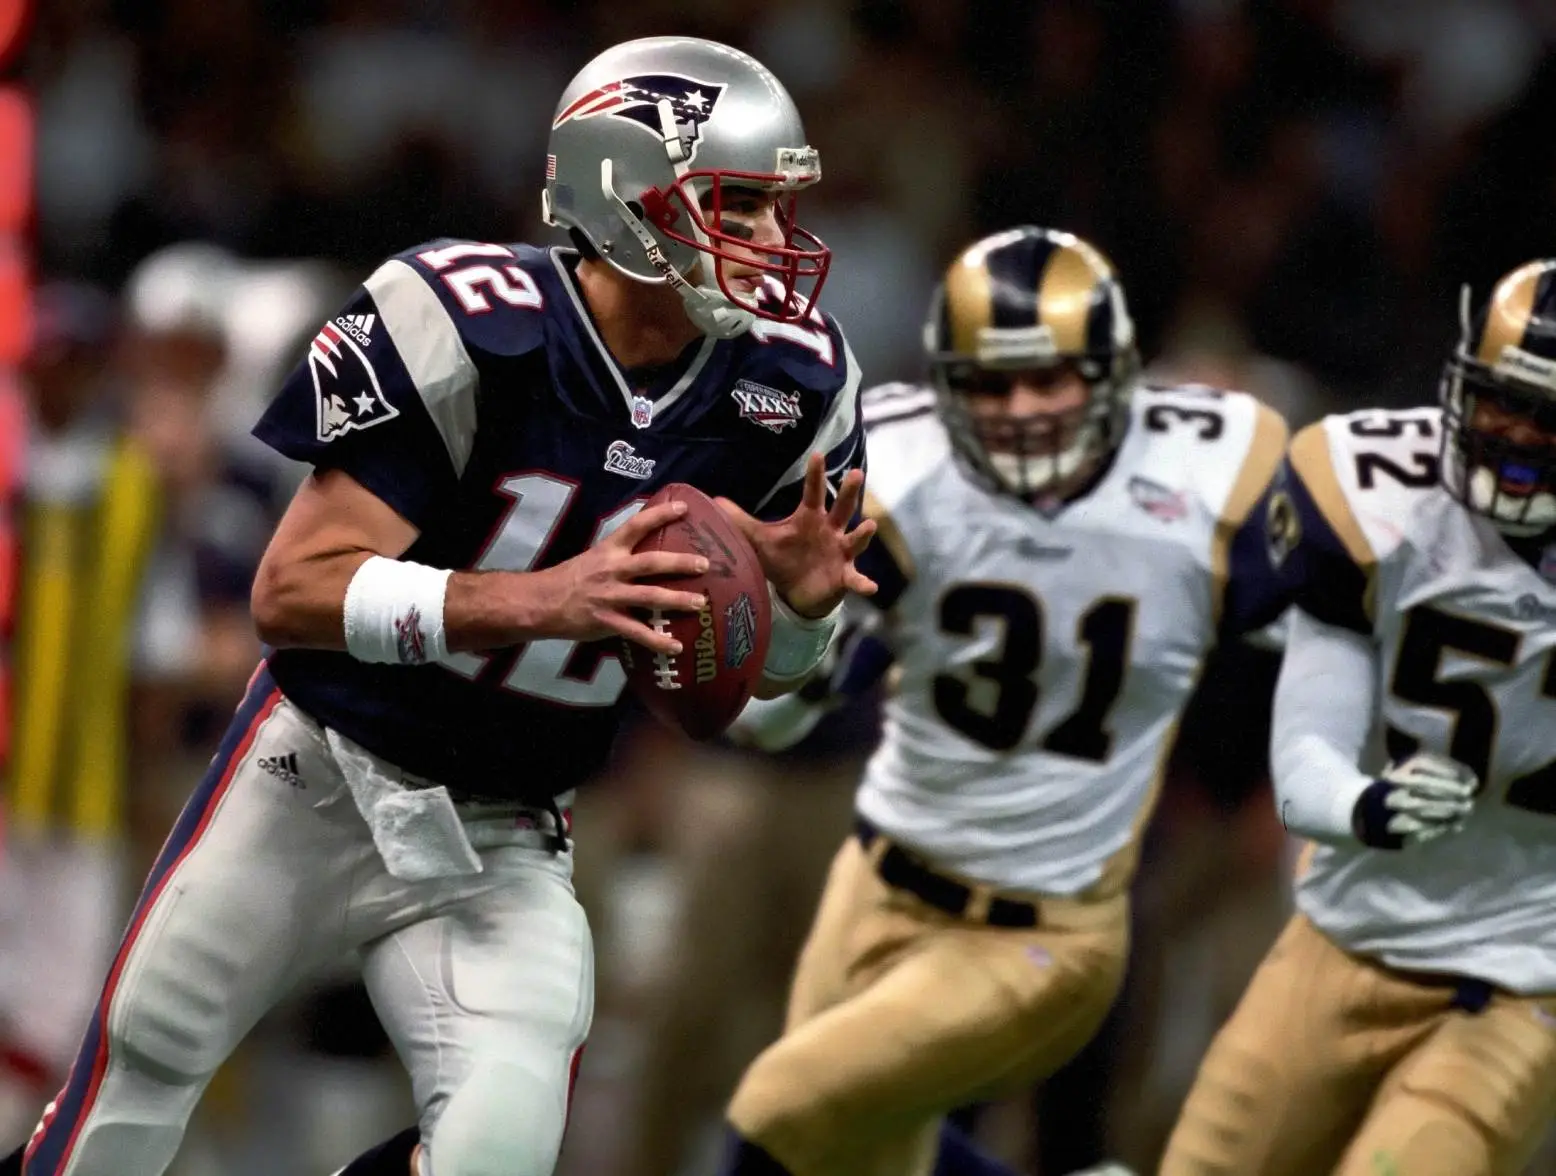 Feb 3, 2002; New Orleans, LA, USA; New England Patriots quarterback Tom Brady (12) in action against the St. Louis Rams during Super Bowl XXXVI at the Louisiana Superdome. The Patriots defeated the Rams 20-17. Credit: USA TODAY Sports